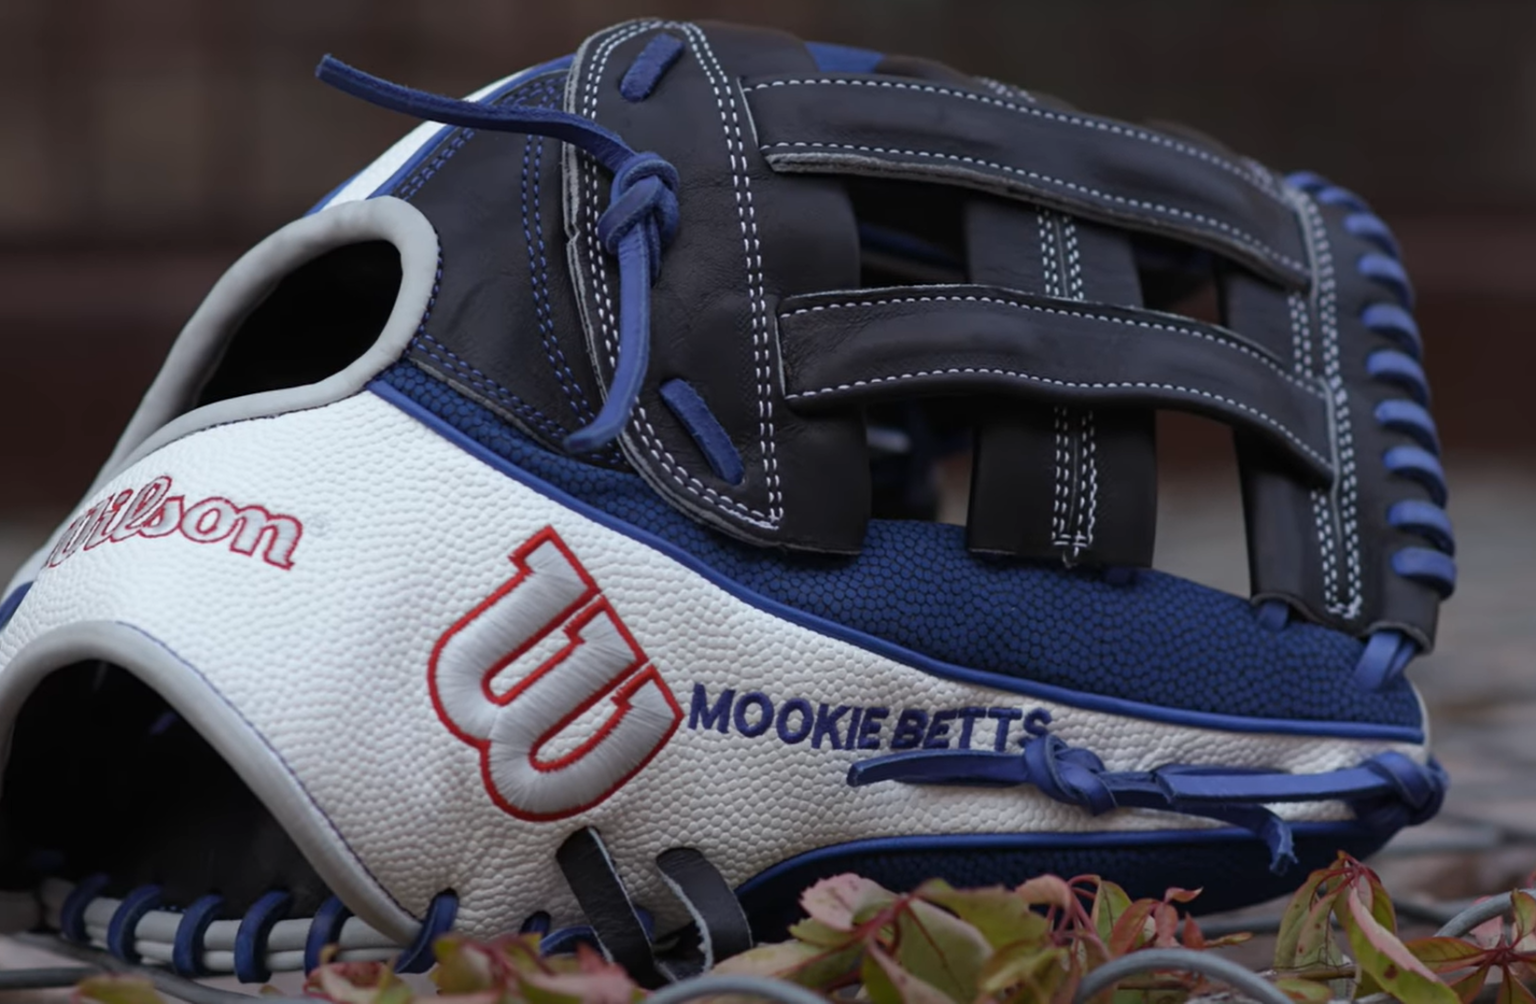 Dodgers Clayton Kershaw, Mookie Betts, and More Team Up with Wilson